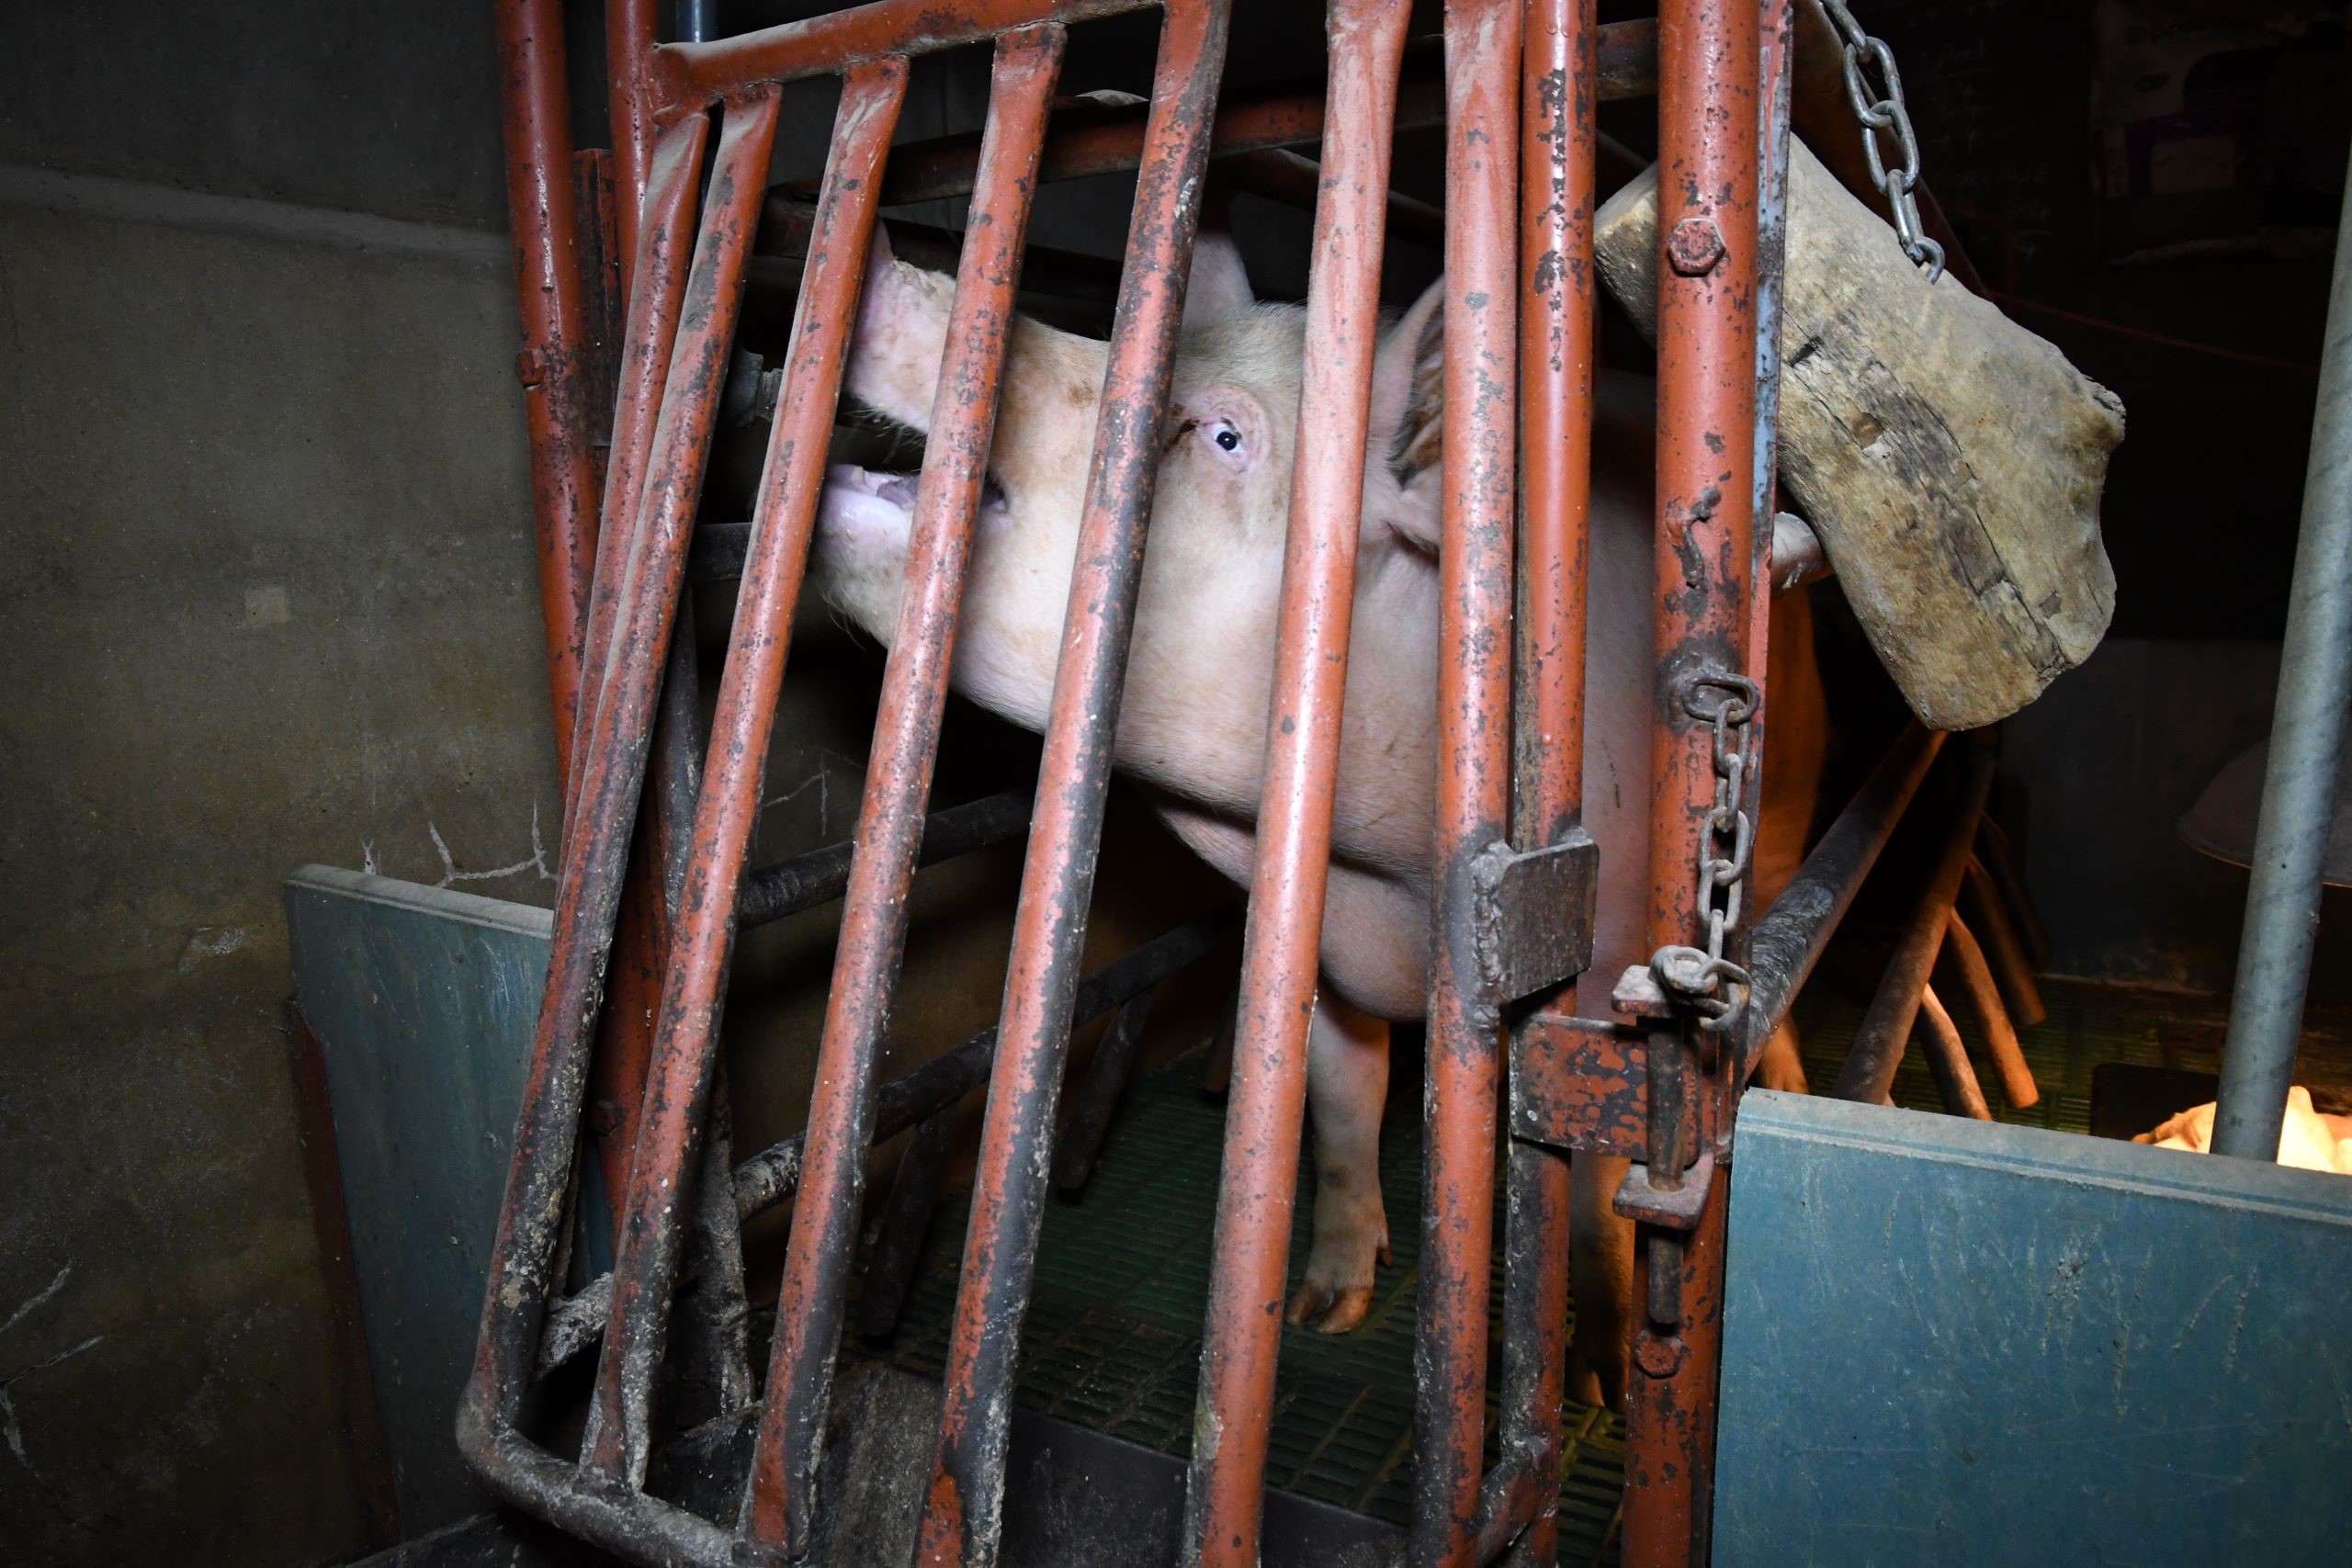 Sow in farrowing crate - UK pig investigation 2019